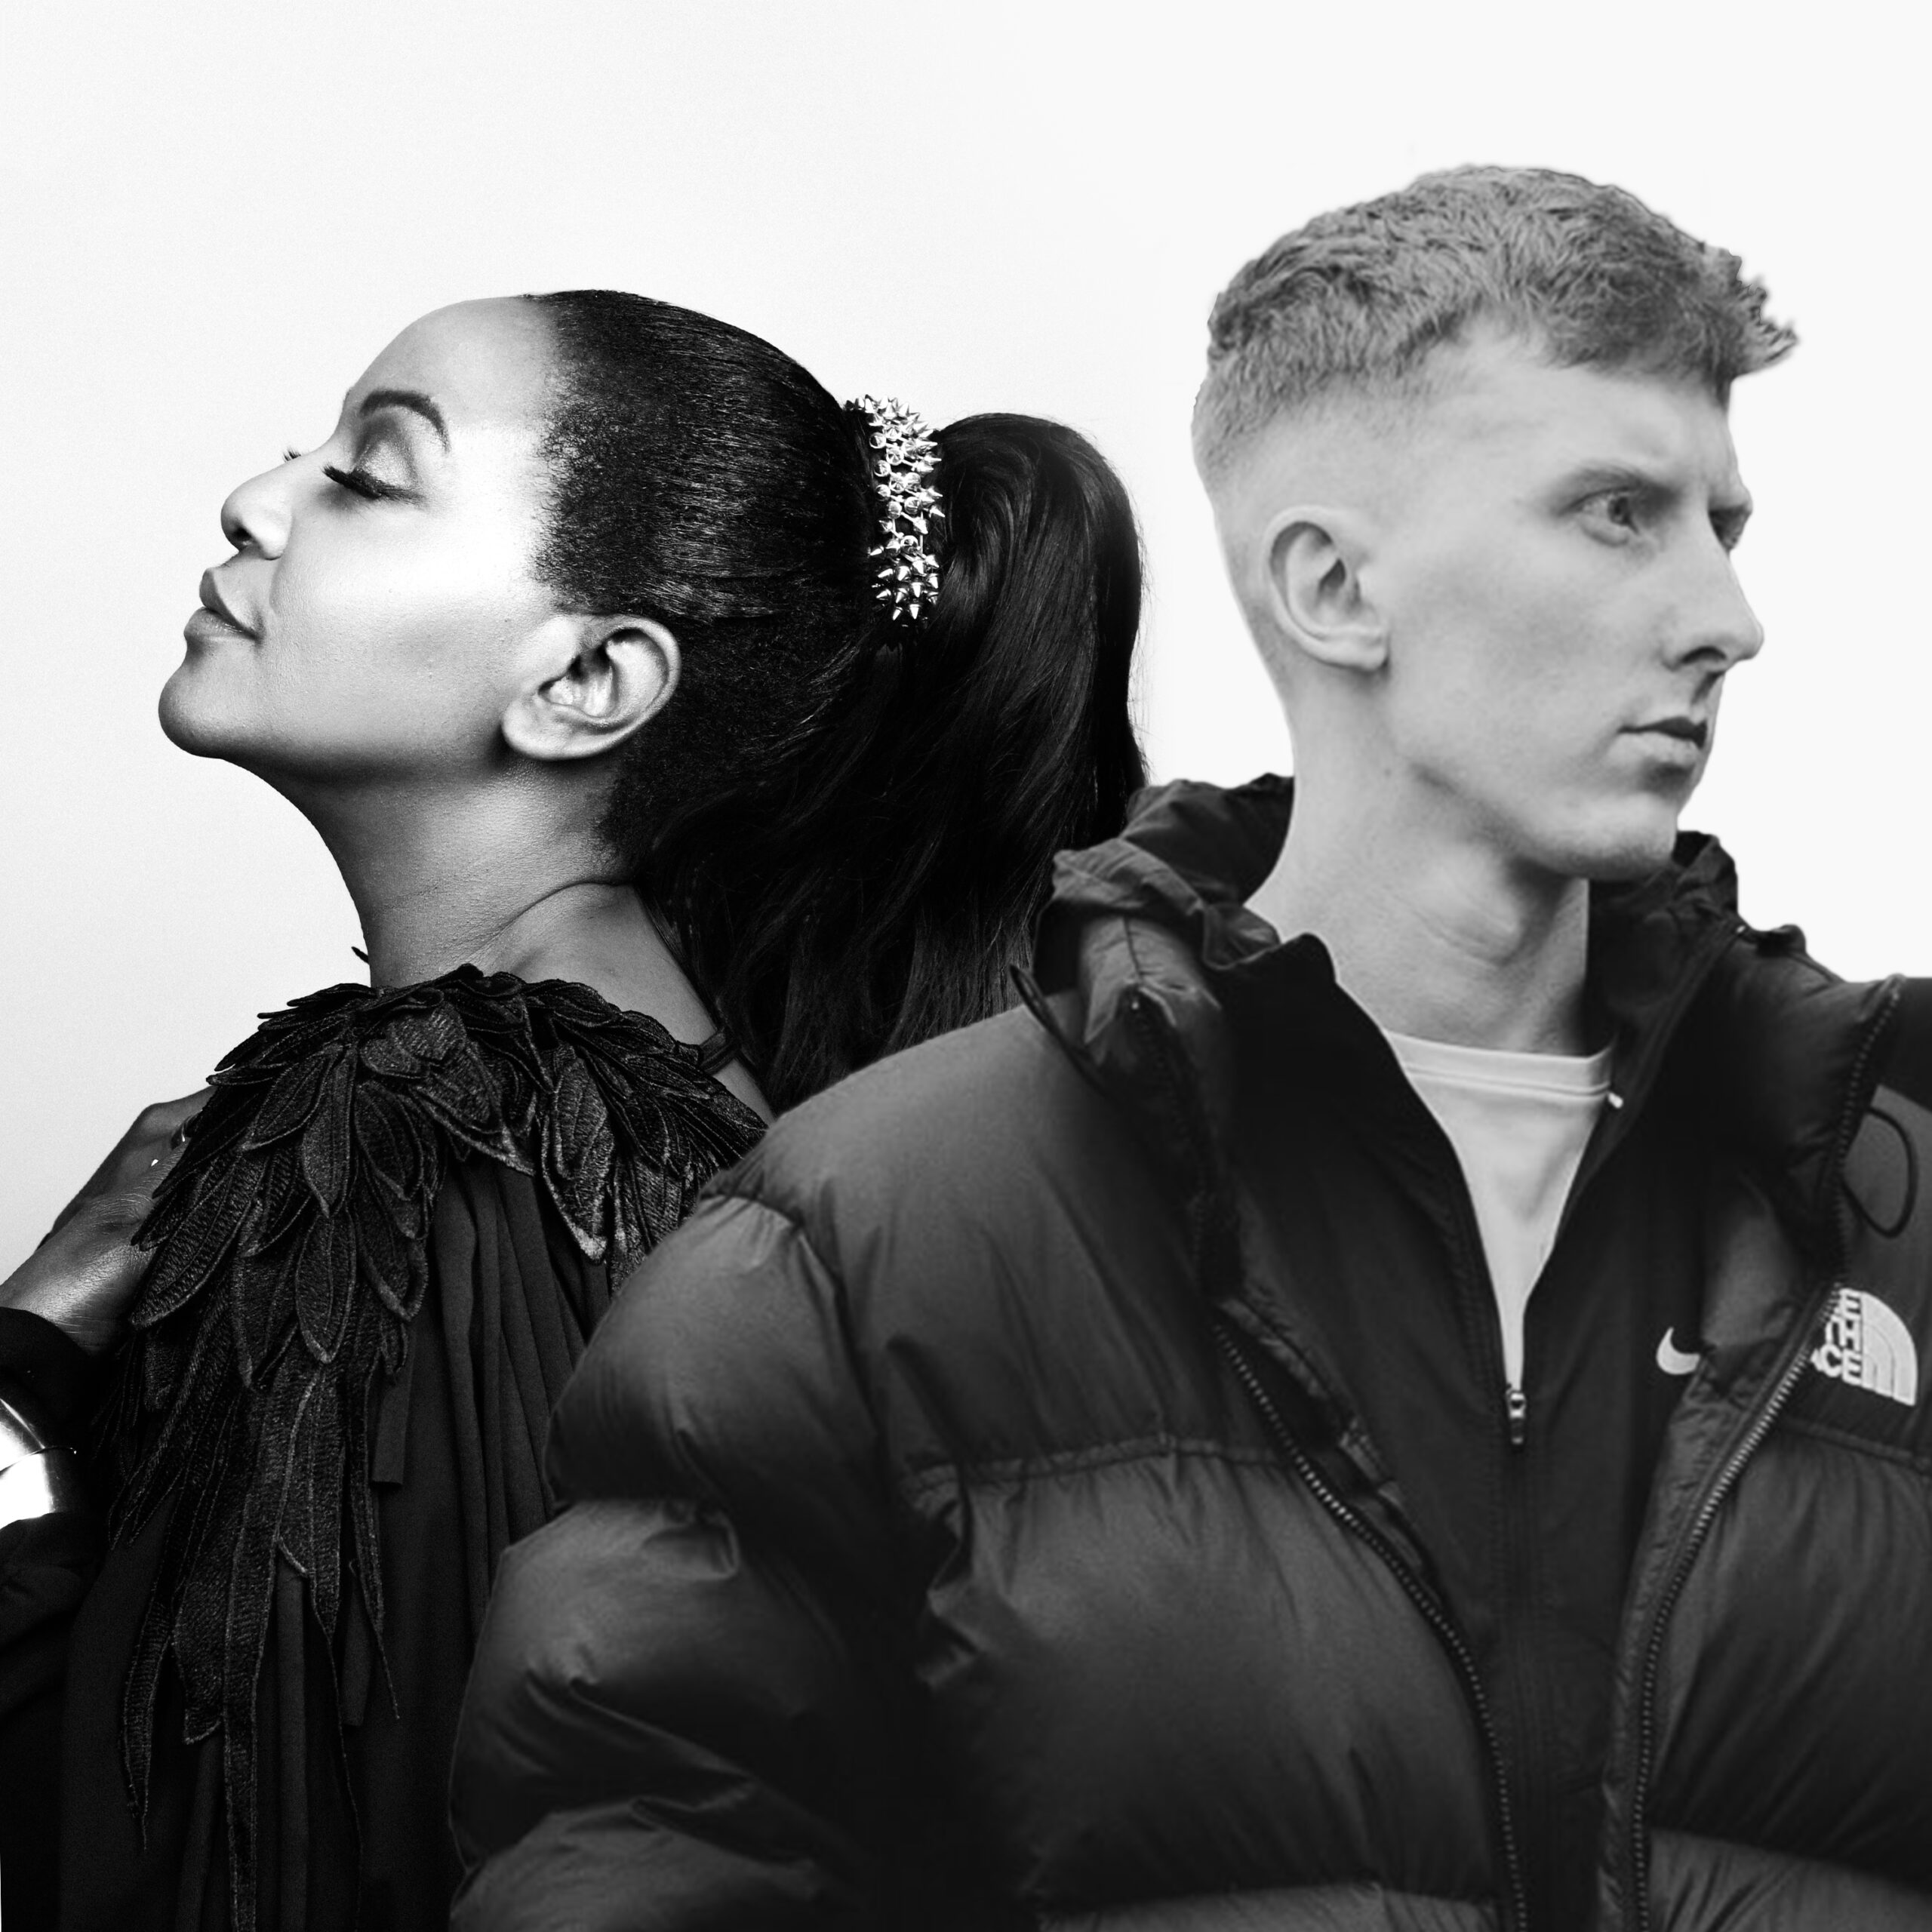 Blair Muir and Angie Brown collaborate on energising new dance single ‘Bass Power’